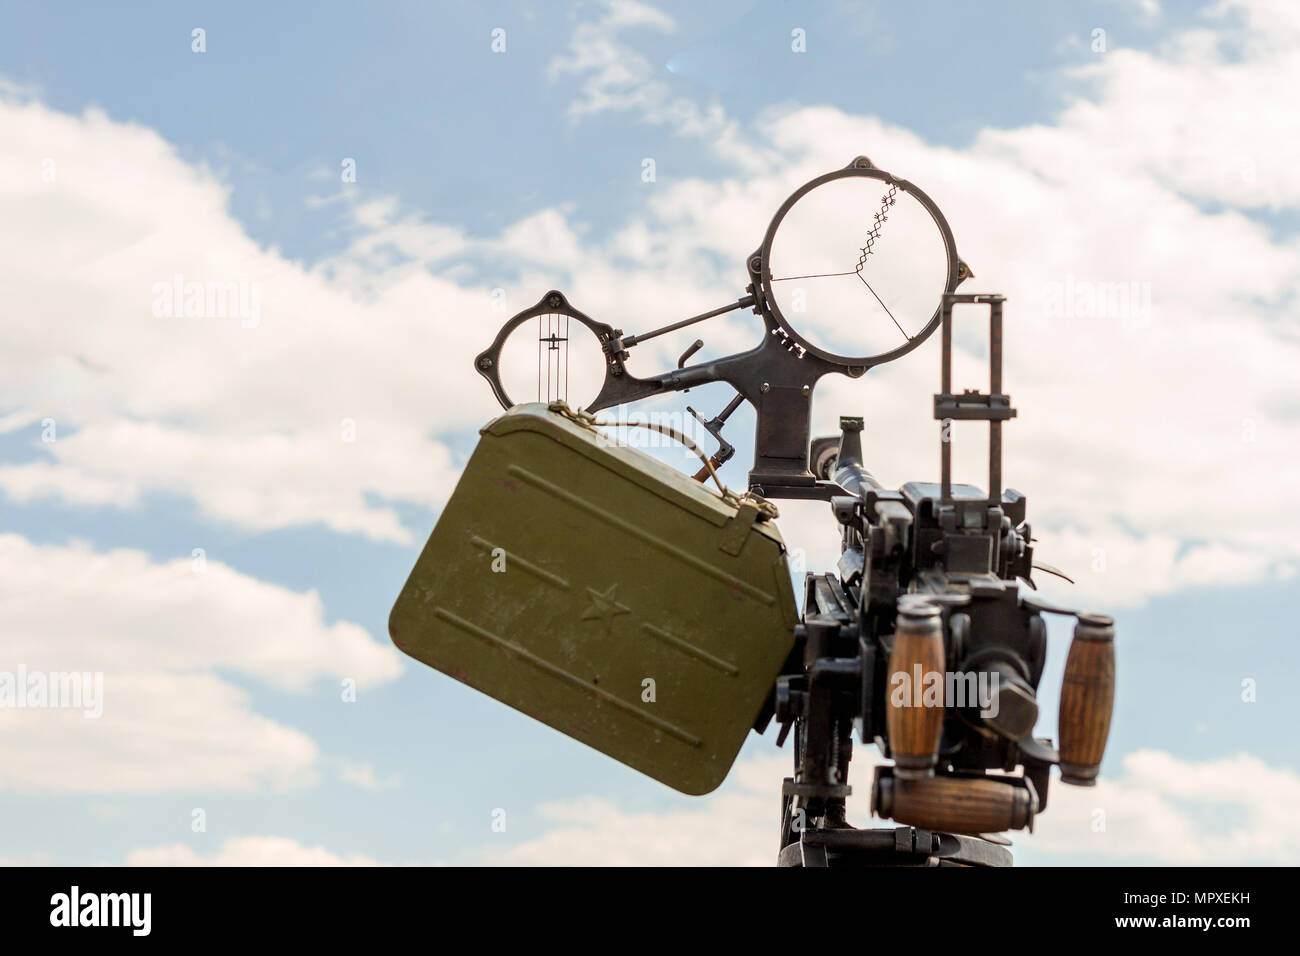 Old ww2 time anti-aircraft machine gun. Close-up front view with cannon aim against clear blue sky. Stock Photo